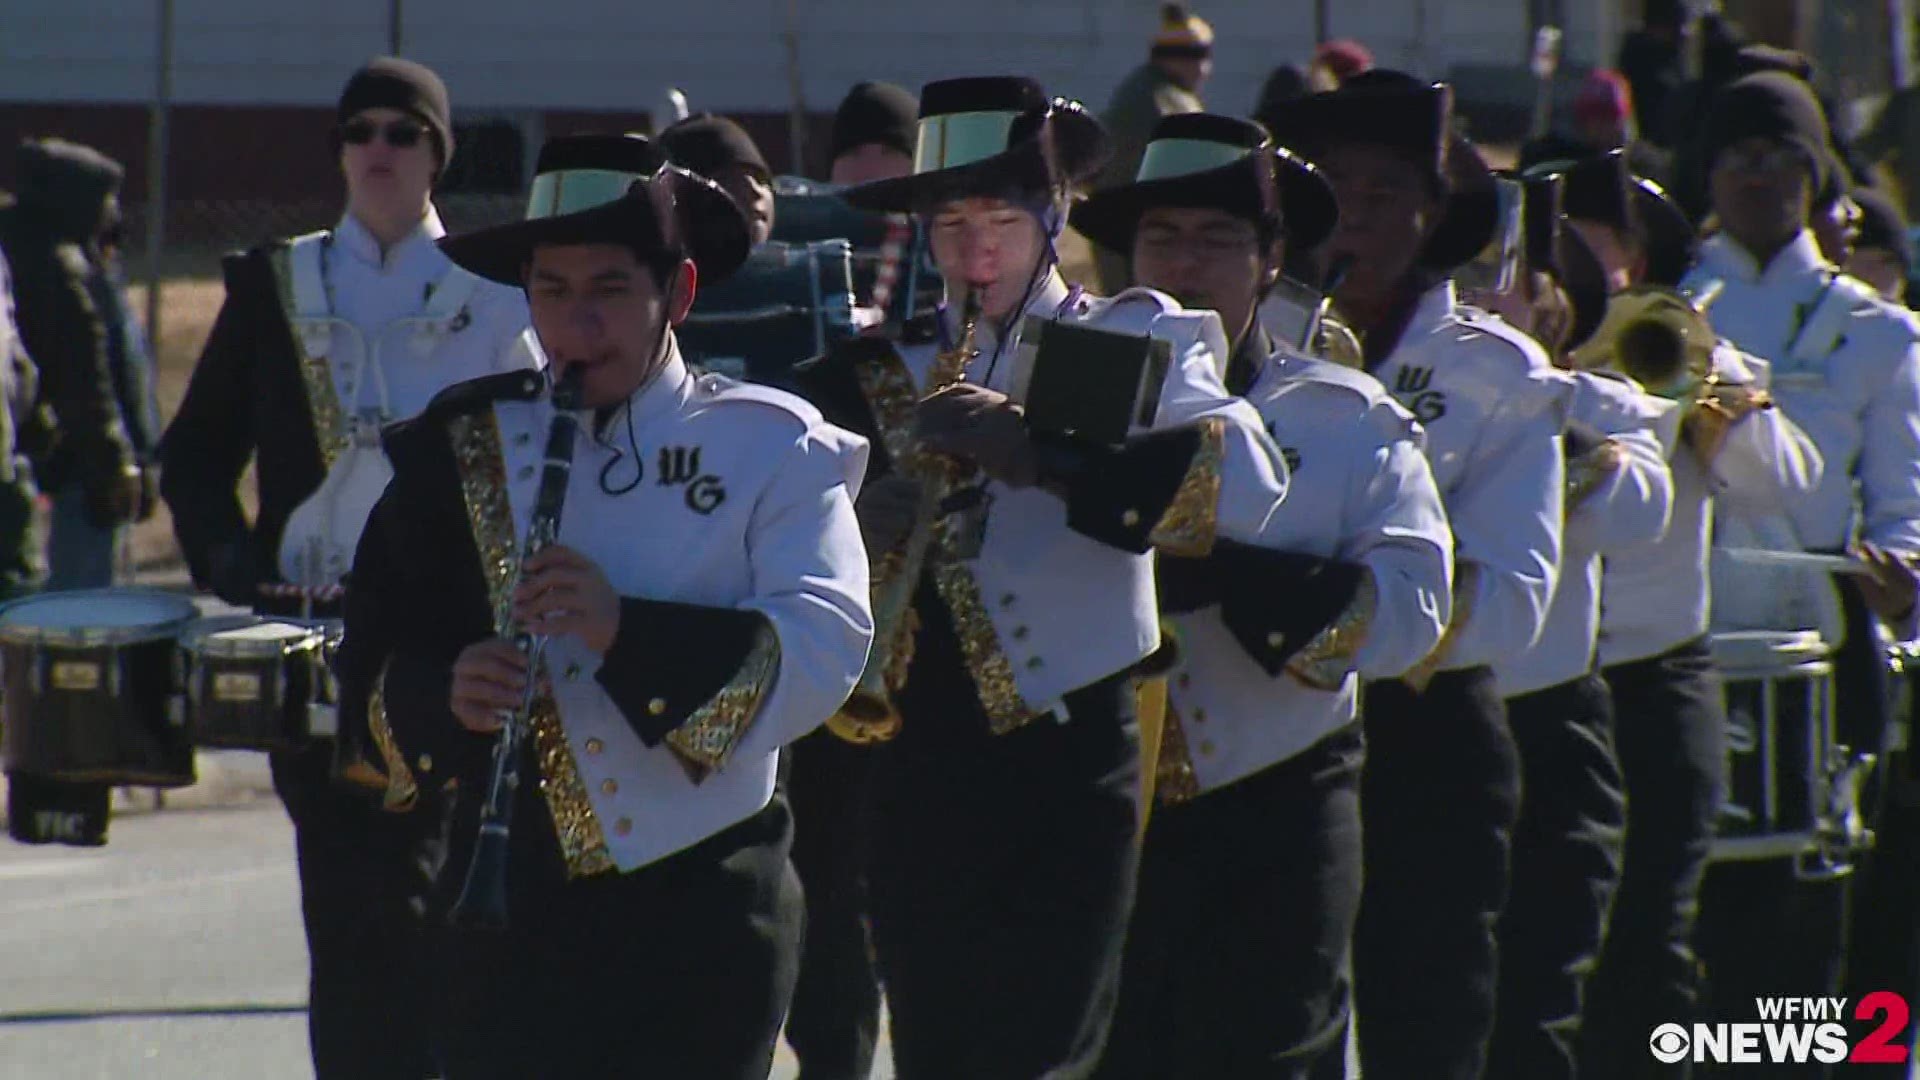 Greensboro held its annual Martin Luther King Jr. Day parade Monday morning.